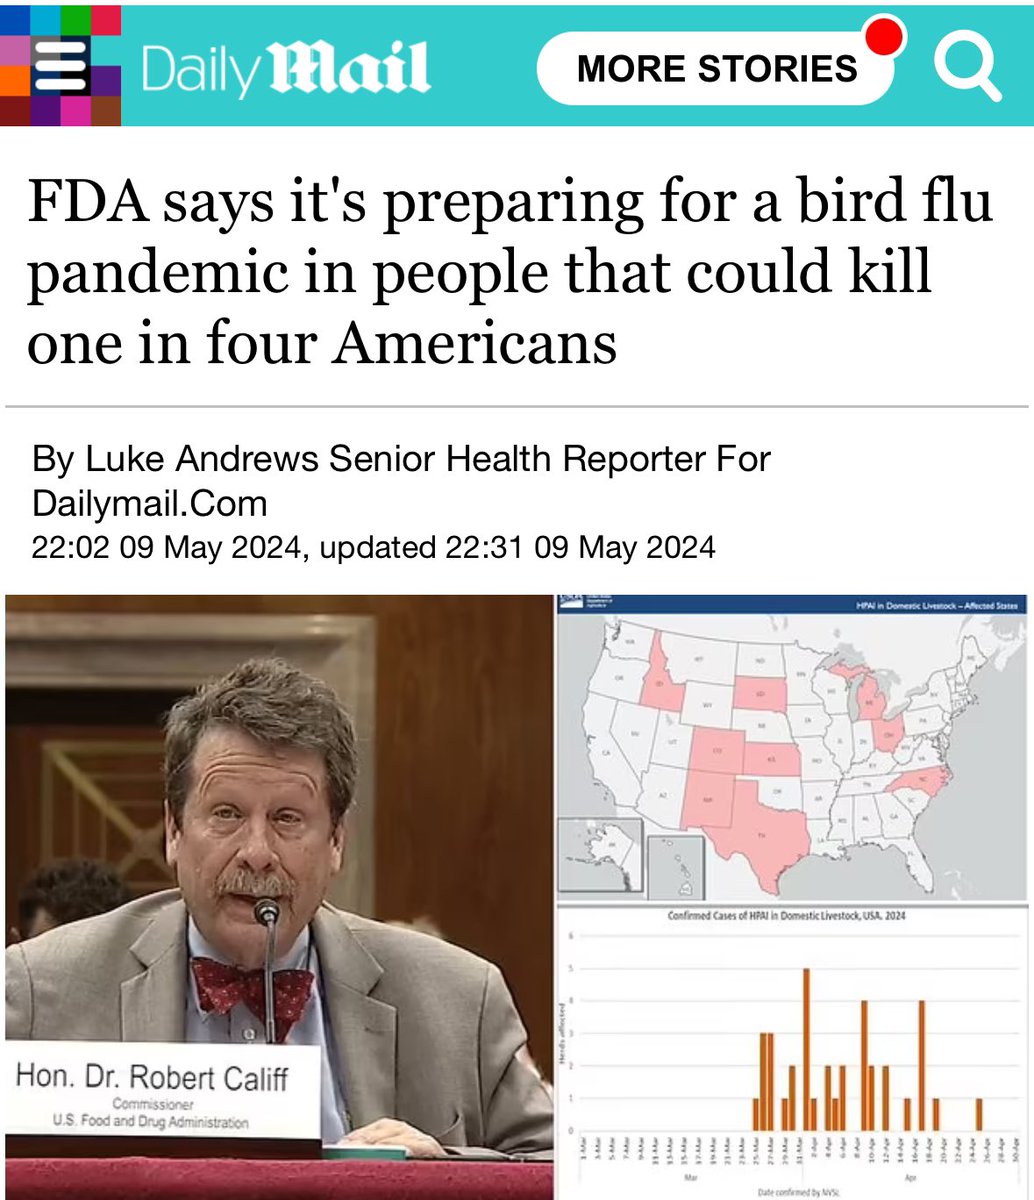 It’s starting to look like H5N1 Bird Flu may be “Disease X”. The MSM have been subtly planting the idea in our heads, and now our health agencies are admitting they are preparing for the H5N1 pandemic. They are going to try it again… Mail-in ballots are their objective.